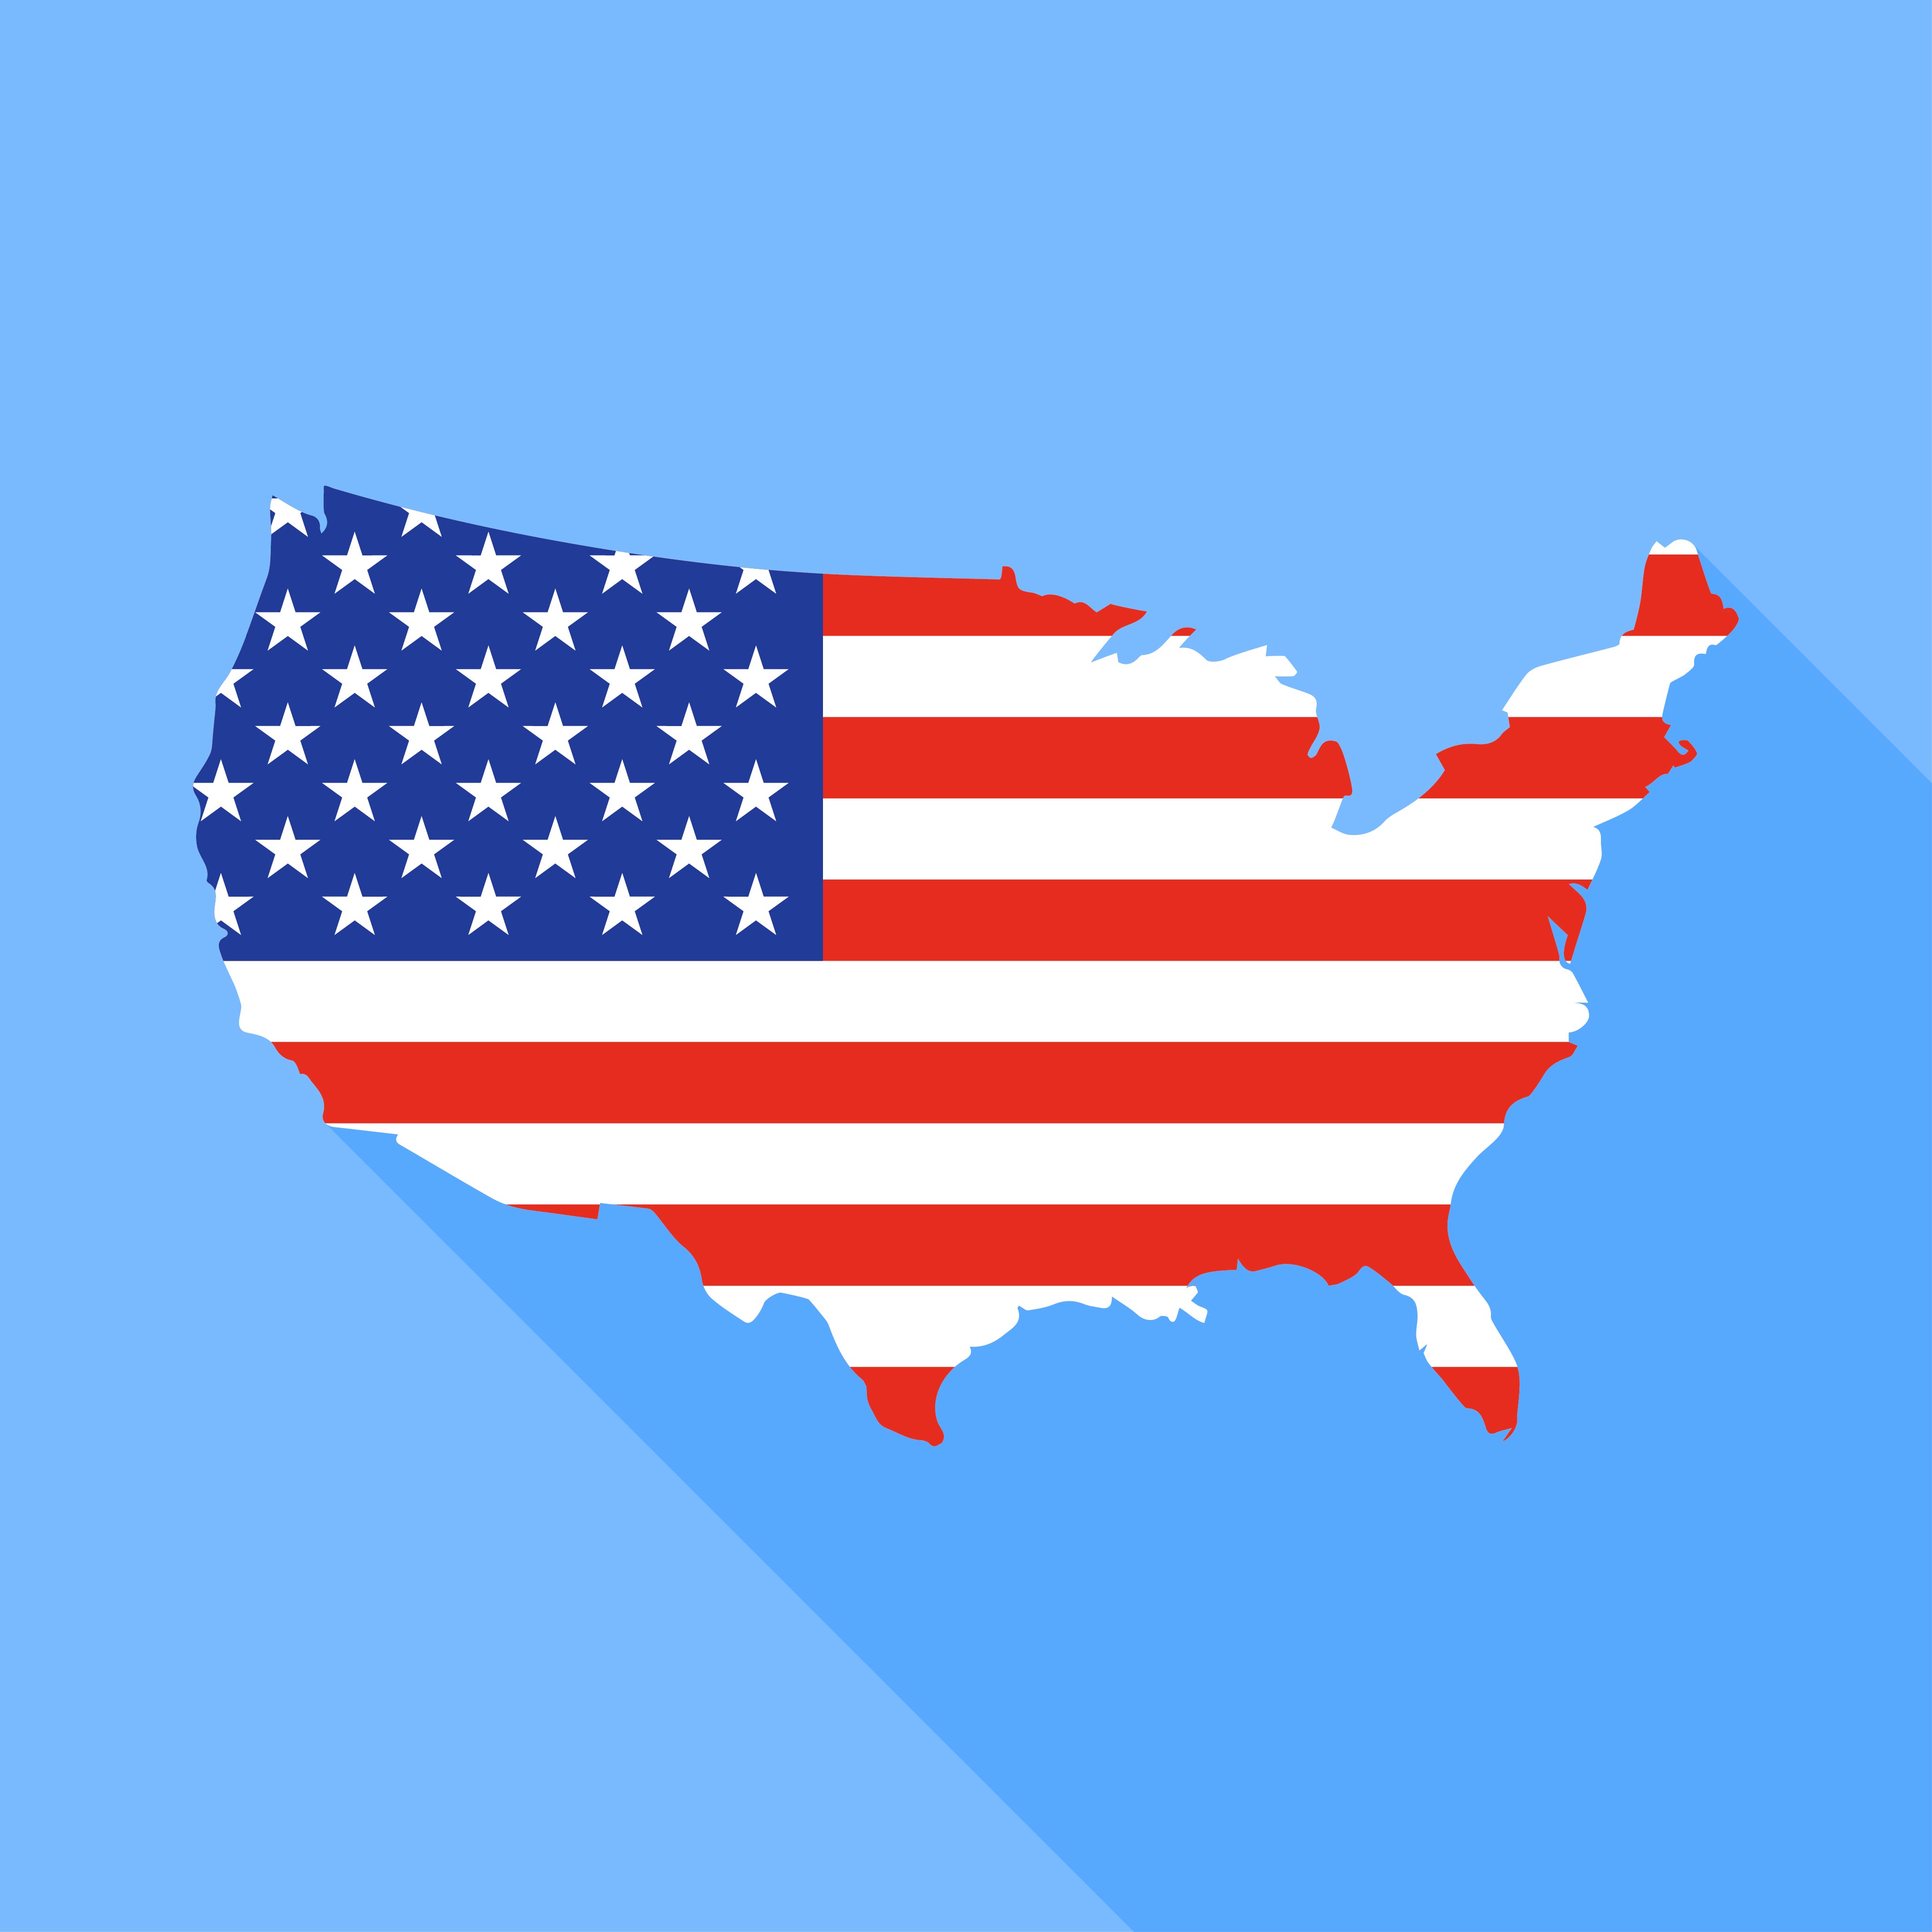 United states map with long shadow vector illustration